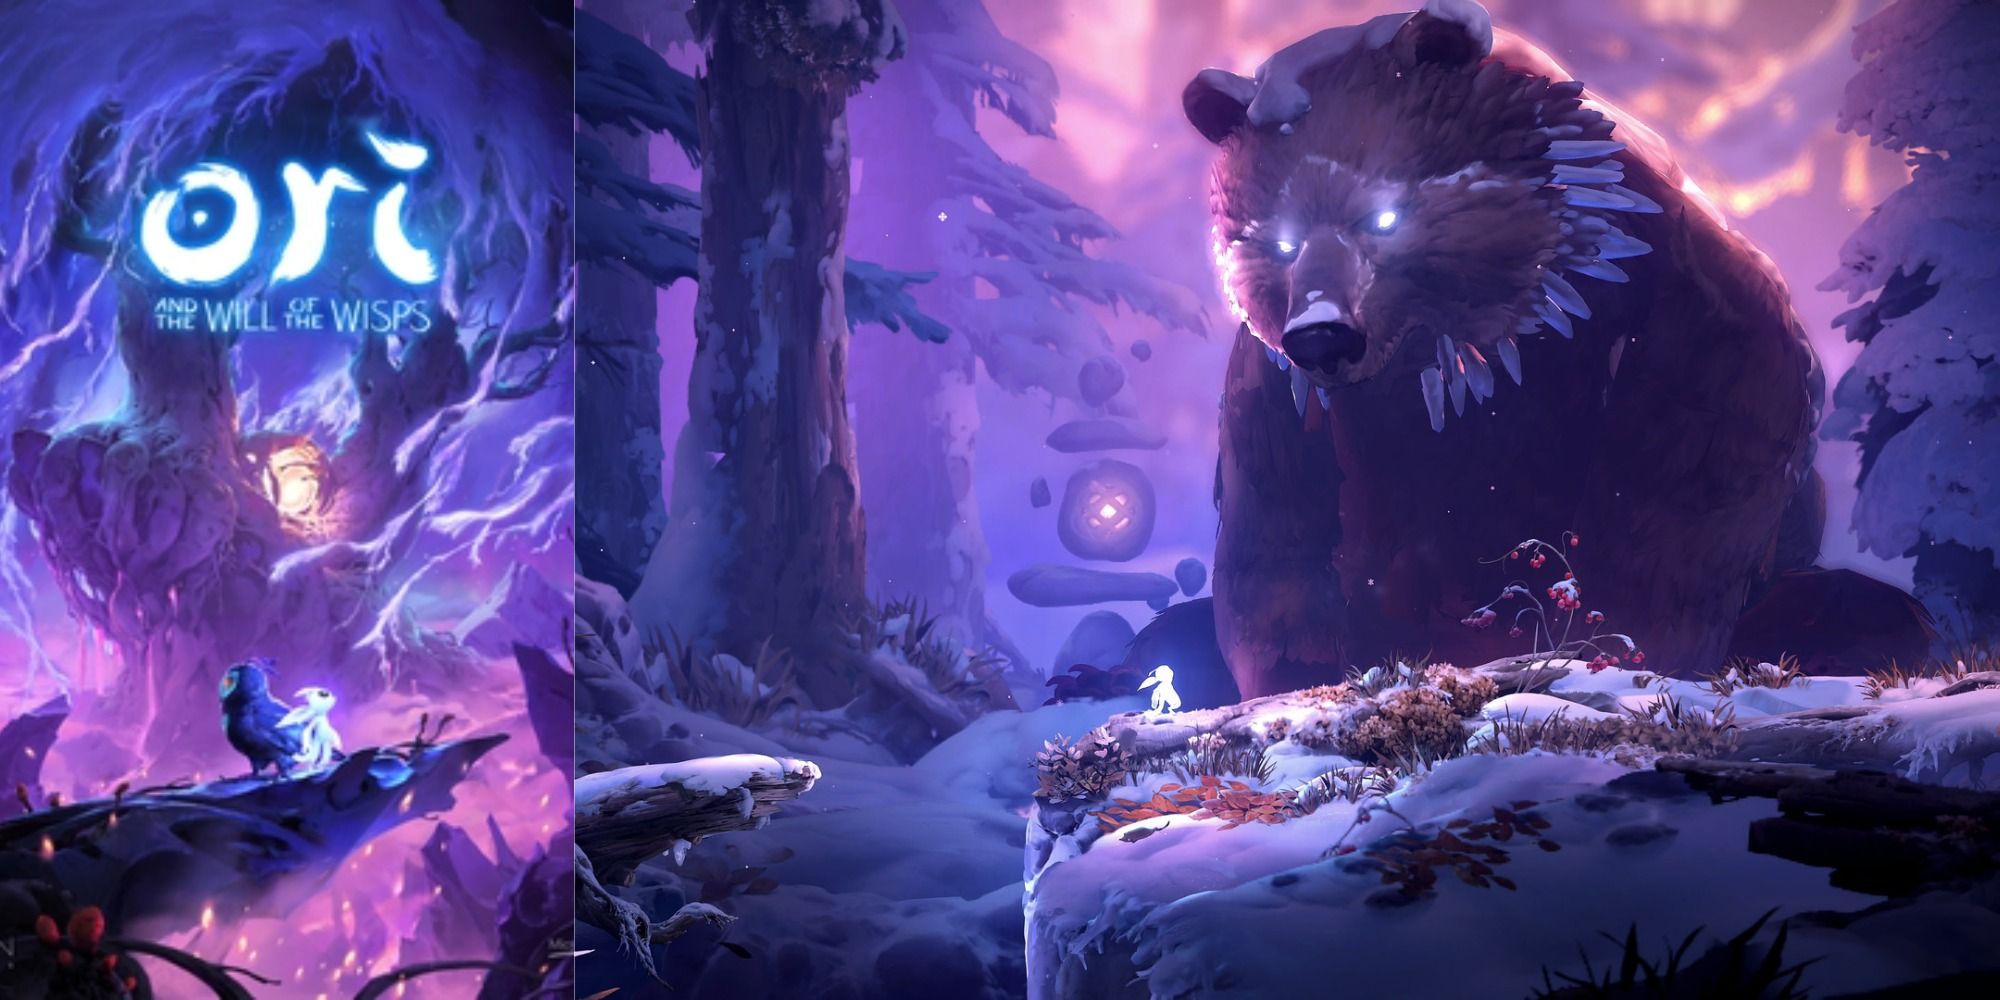 Ori And The Will Of The Wisps poster and gameplay